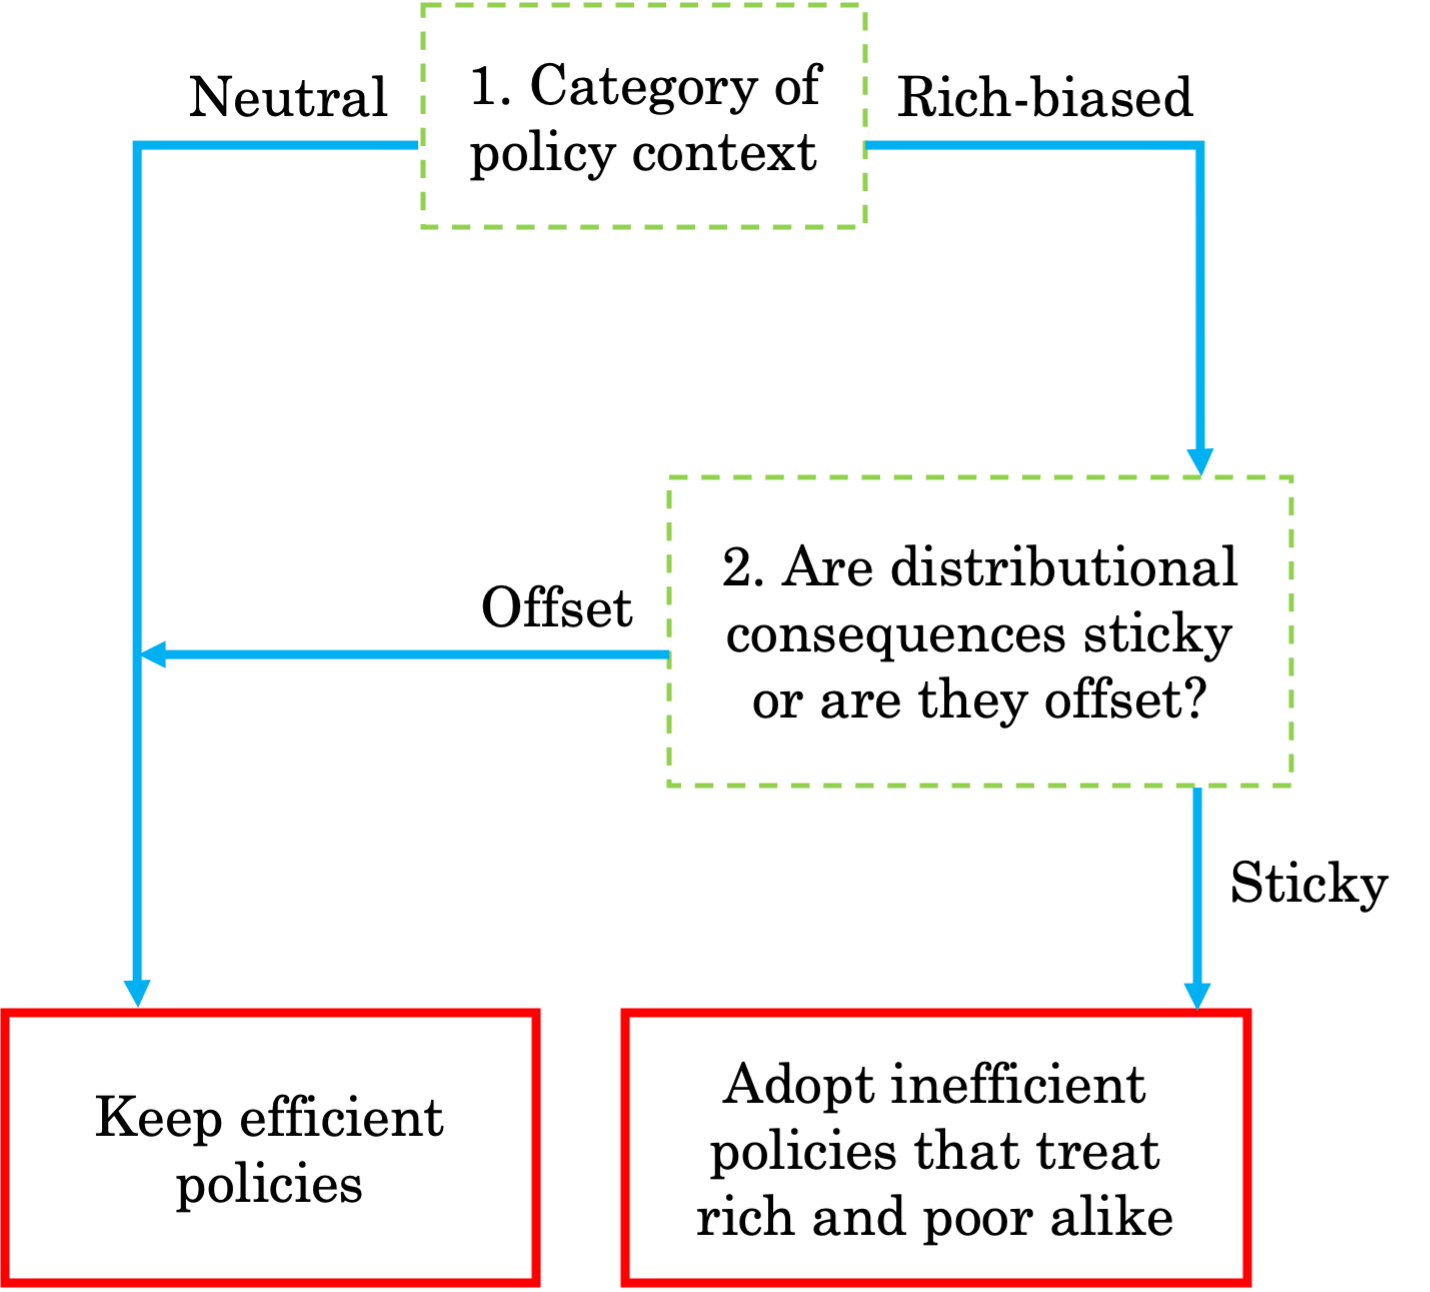 Diagram of 1. Category of policy context, and 2. Are distributional consequences sticky or are they offset